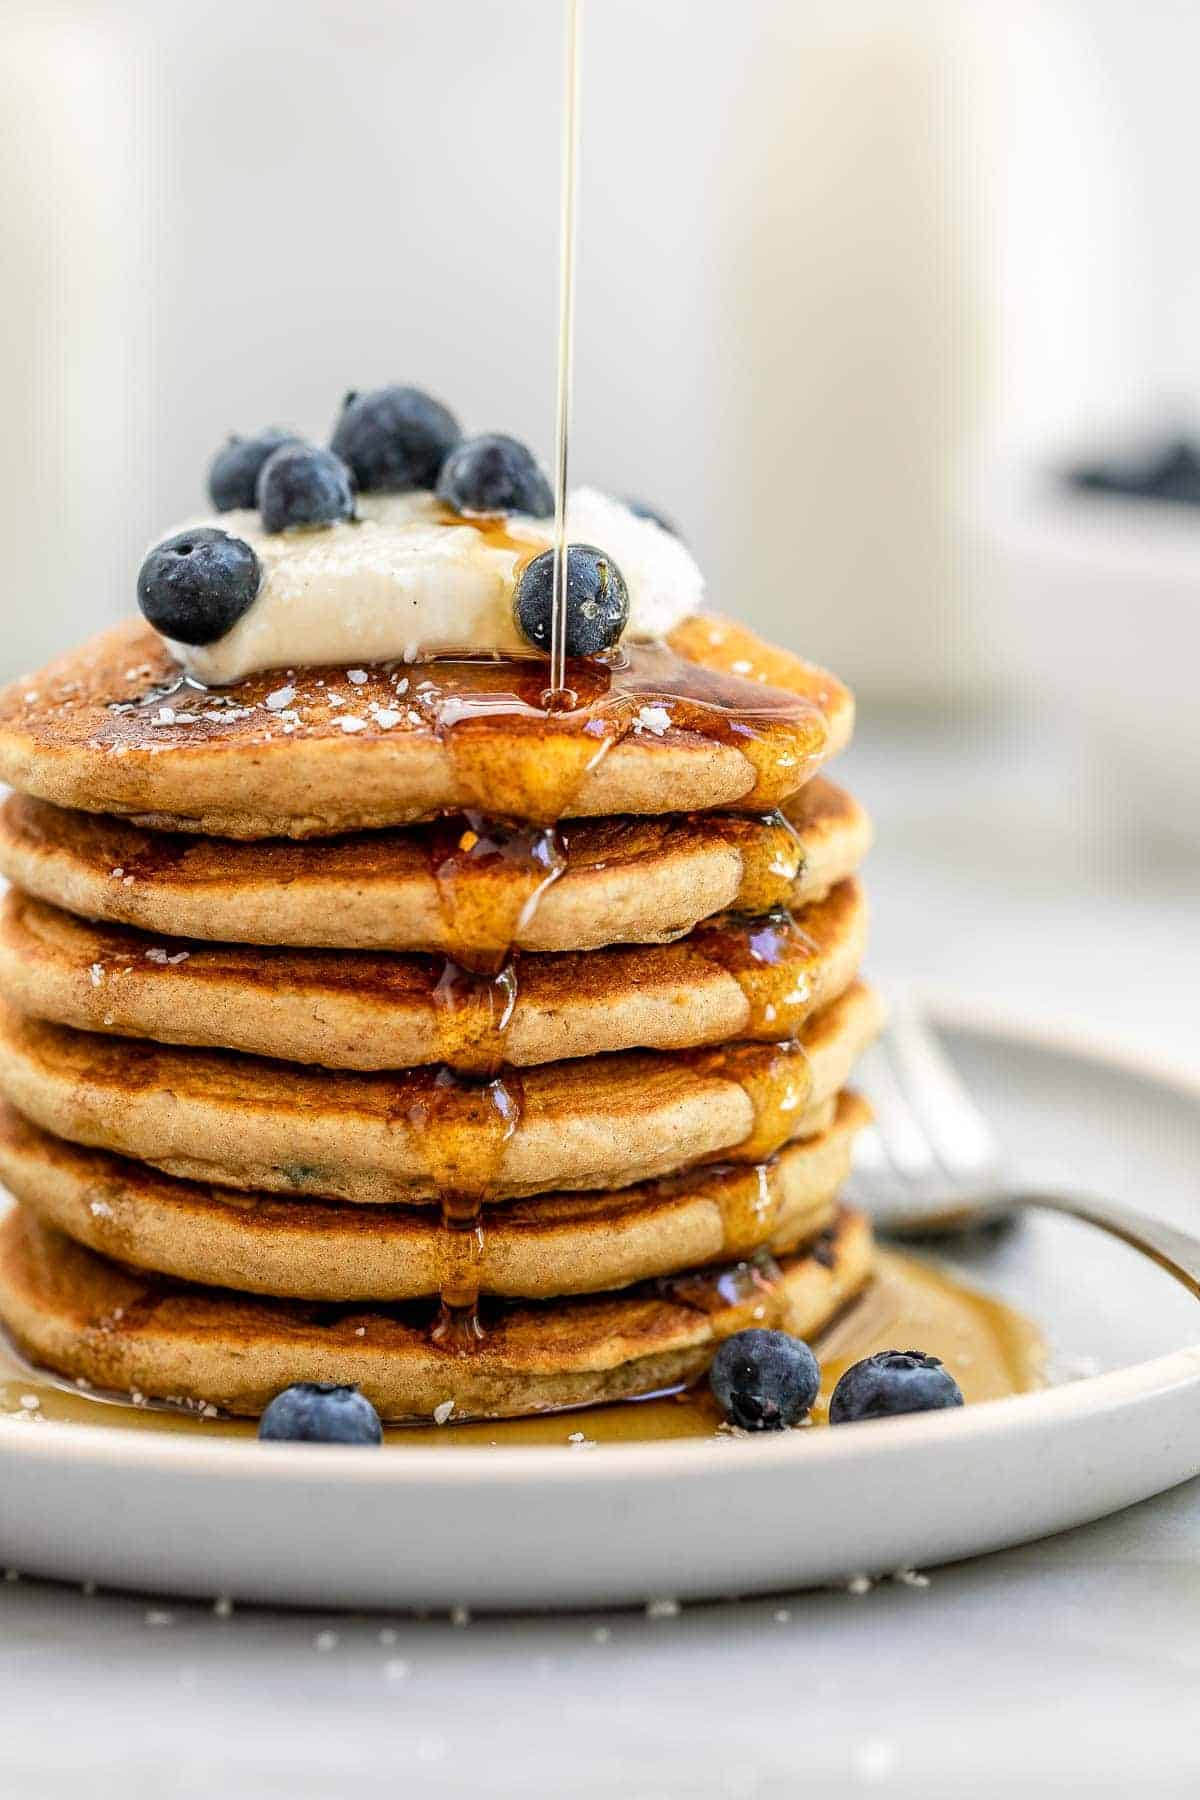 Up close image of the vegan and gluten free blueberry pancakes.